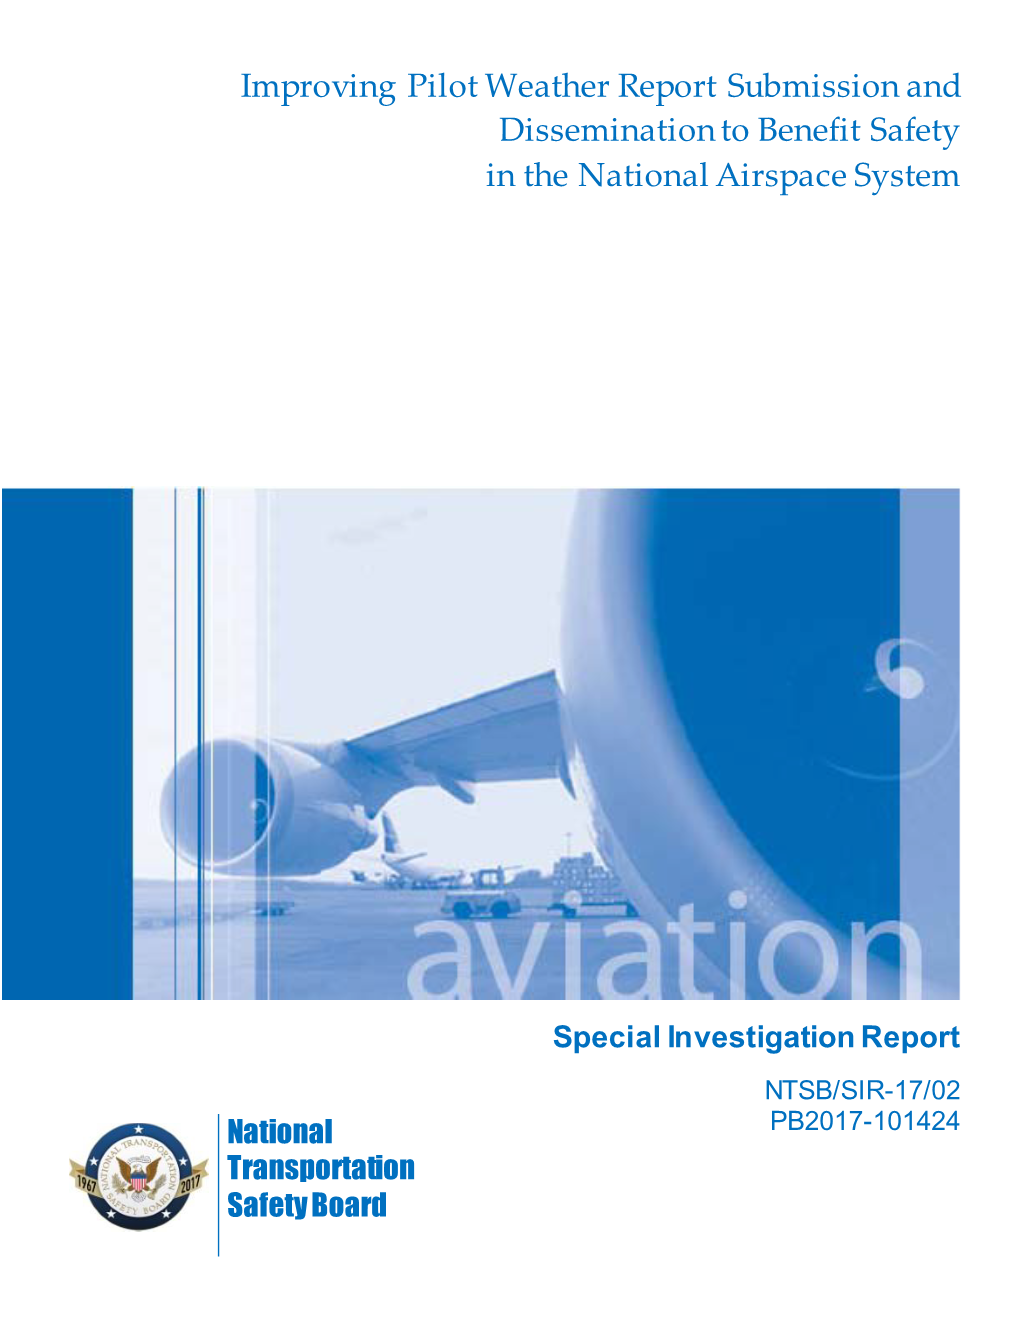 Improving Pilot Weather Report Submission and Dissemination to Benefit Safety in the National Airspace System